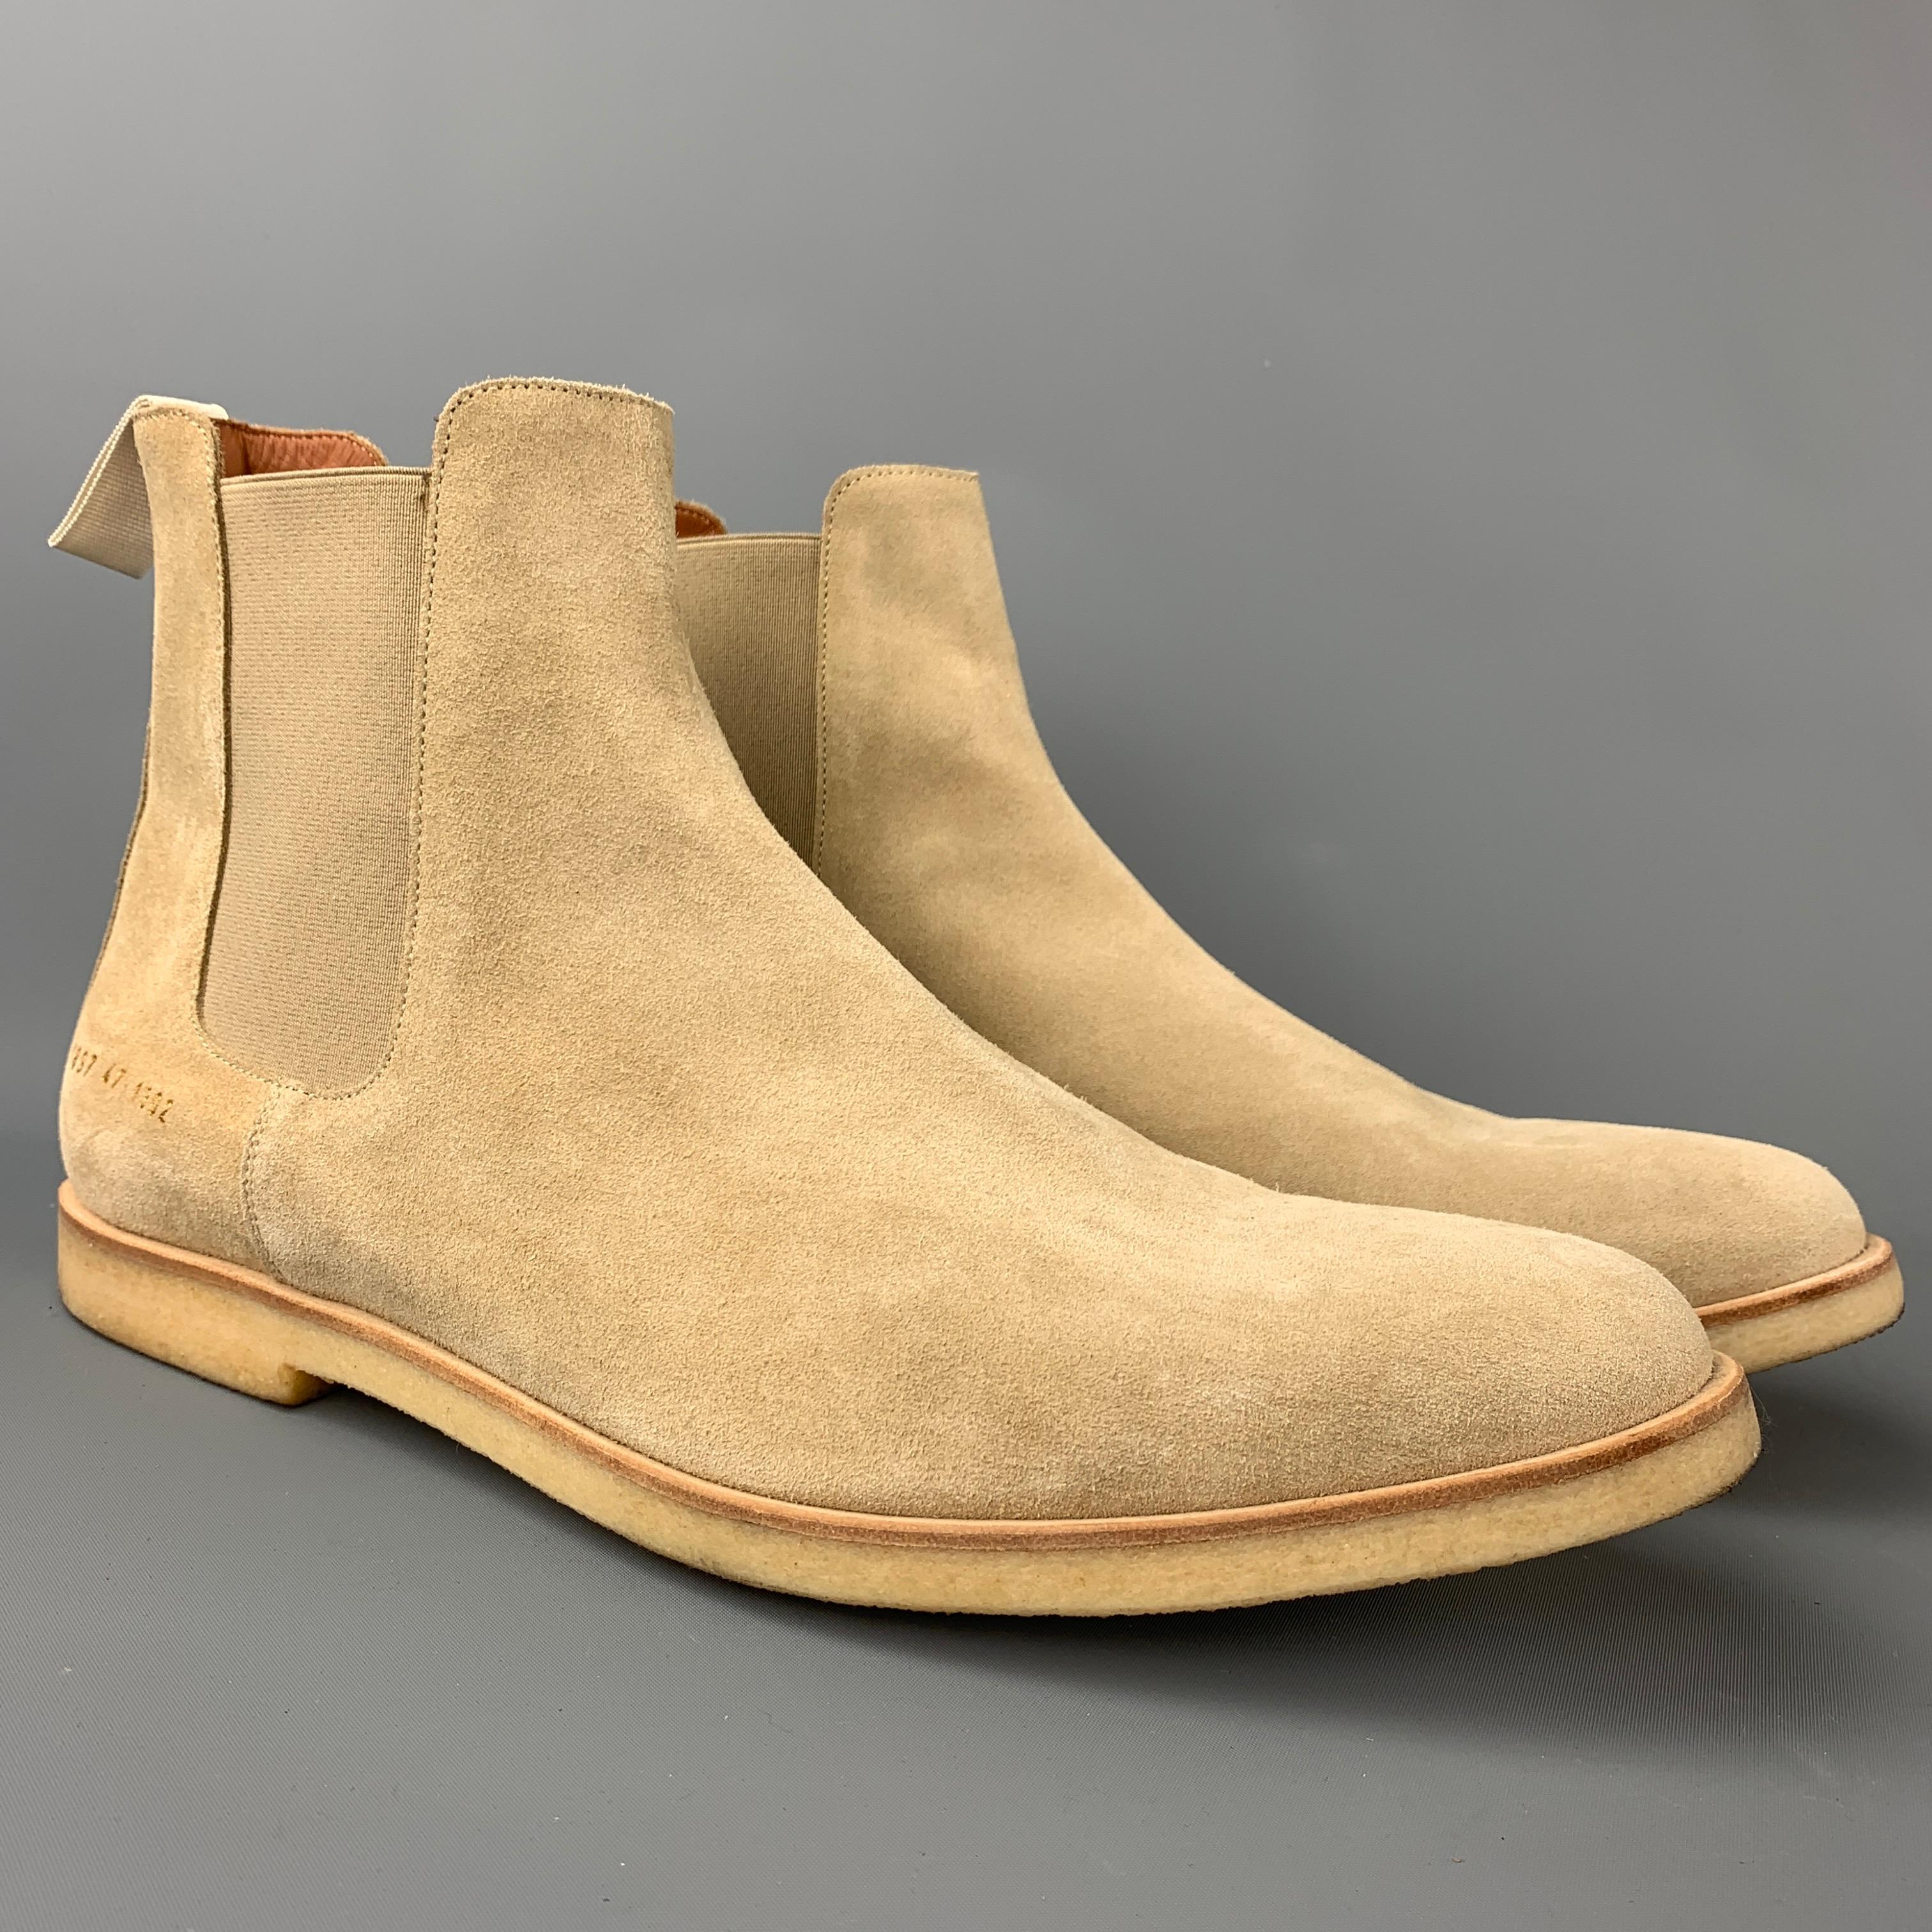 COMMON PROJECTS boots comes in a beige suede featuring a chelsea style, slip on, and a creep sole. Made in Italy.

Very Good Pre-Owned Condition.
Marked: 1897 47 1302
Original Retail Price: $530.00

Measurements:

Length: 13 in.
Width: 4.5